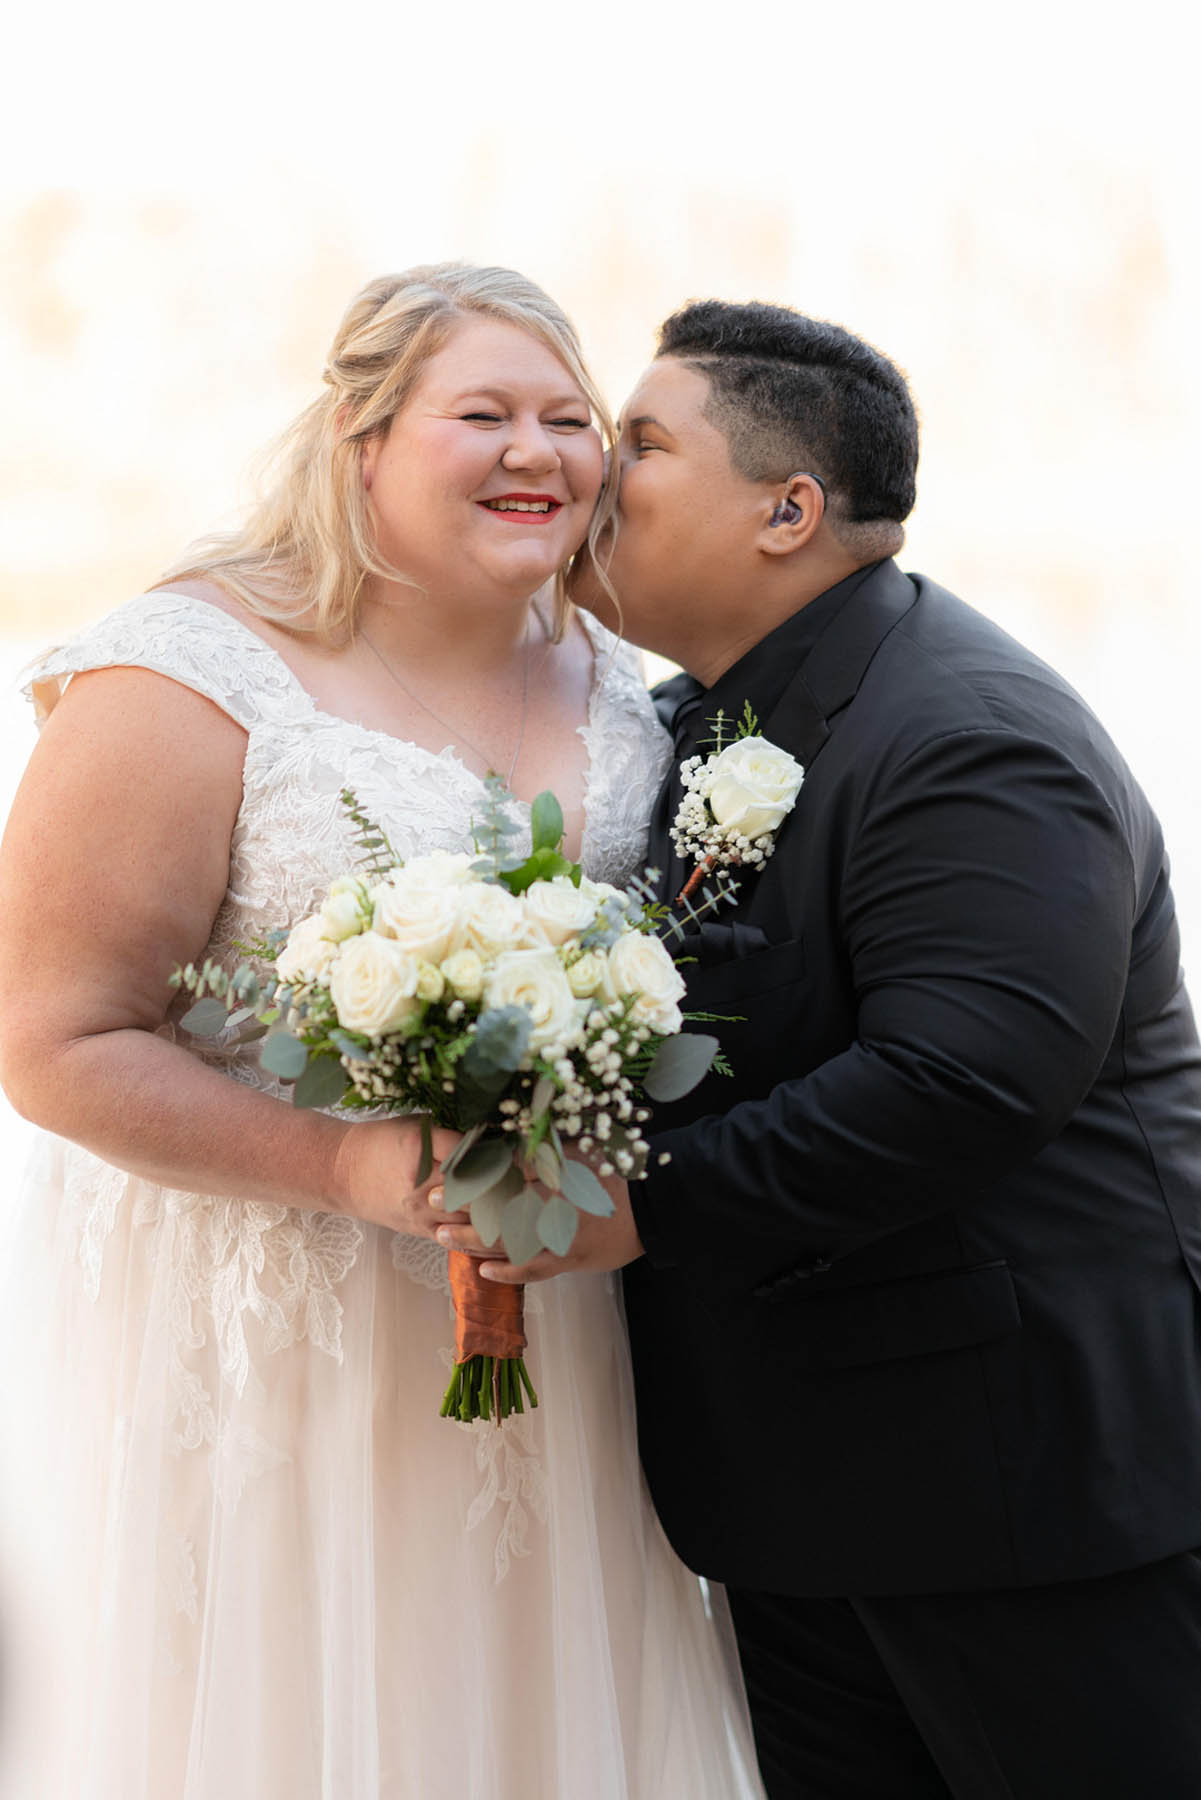 Two brides, one white and one black, stand arm in arm next to each other, as one kisses the other on the cheek